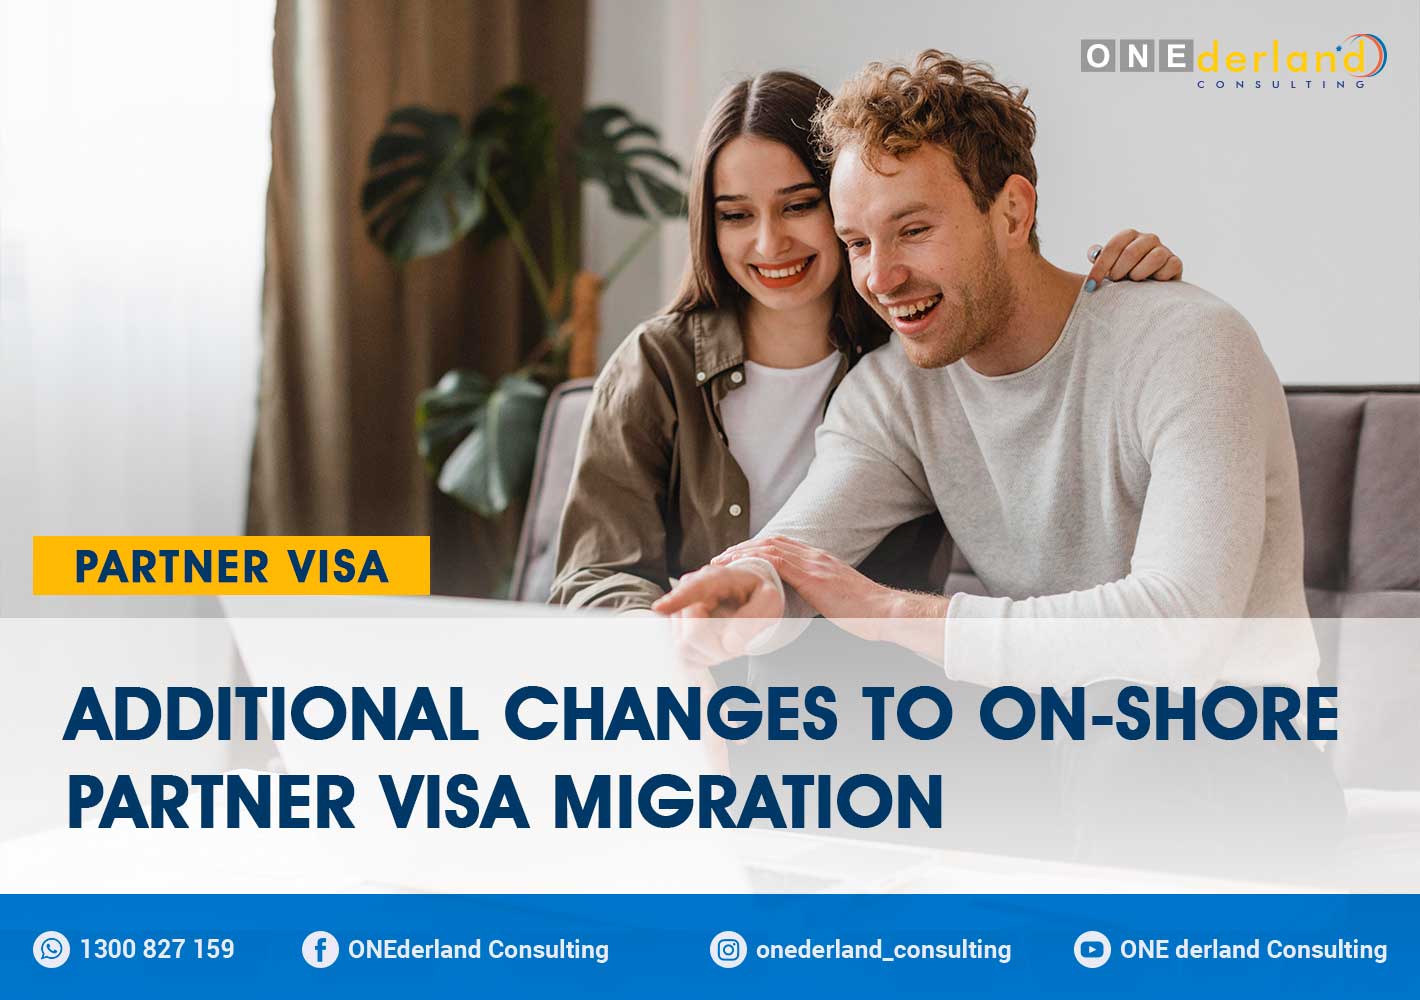 Changes to On-shore Partner Visa Migration That You Need To Know